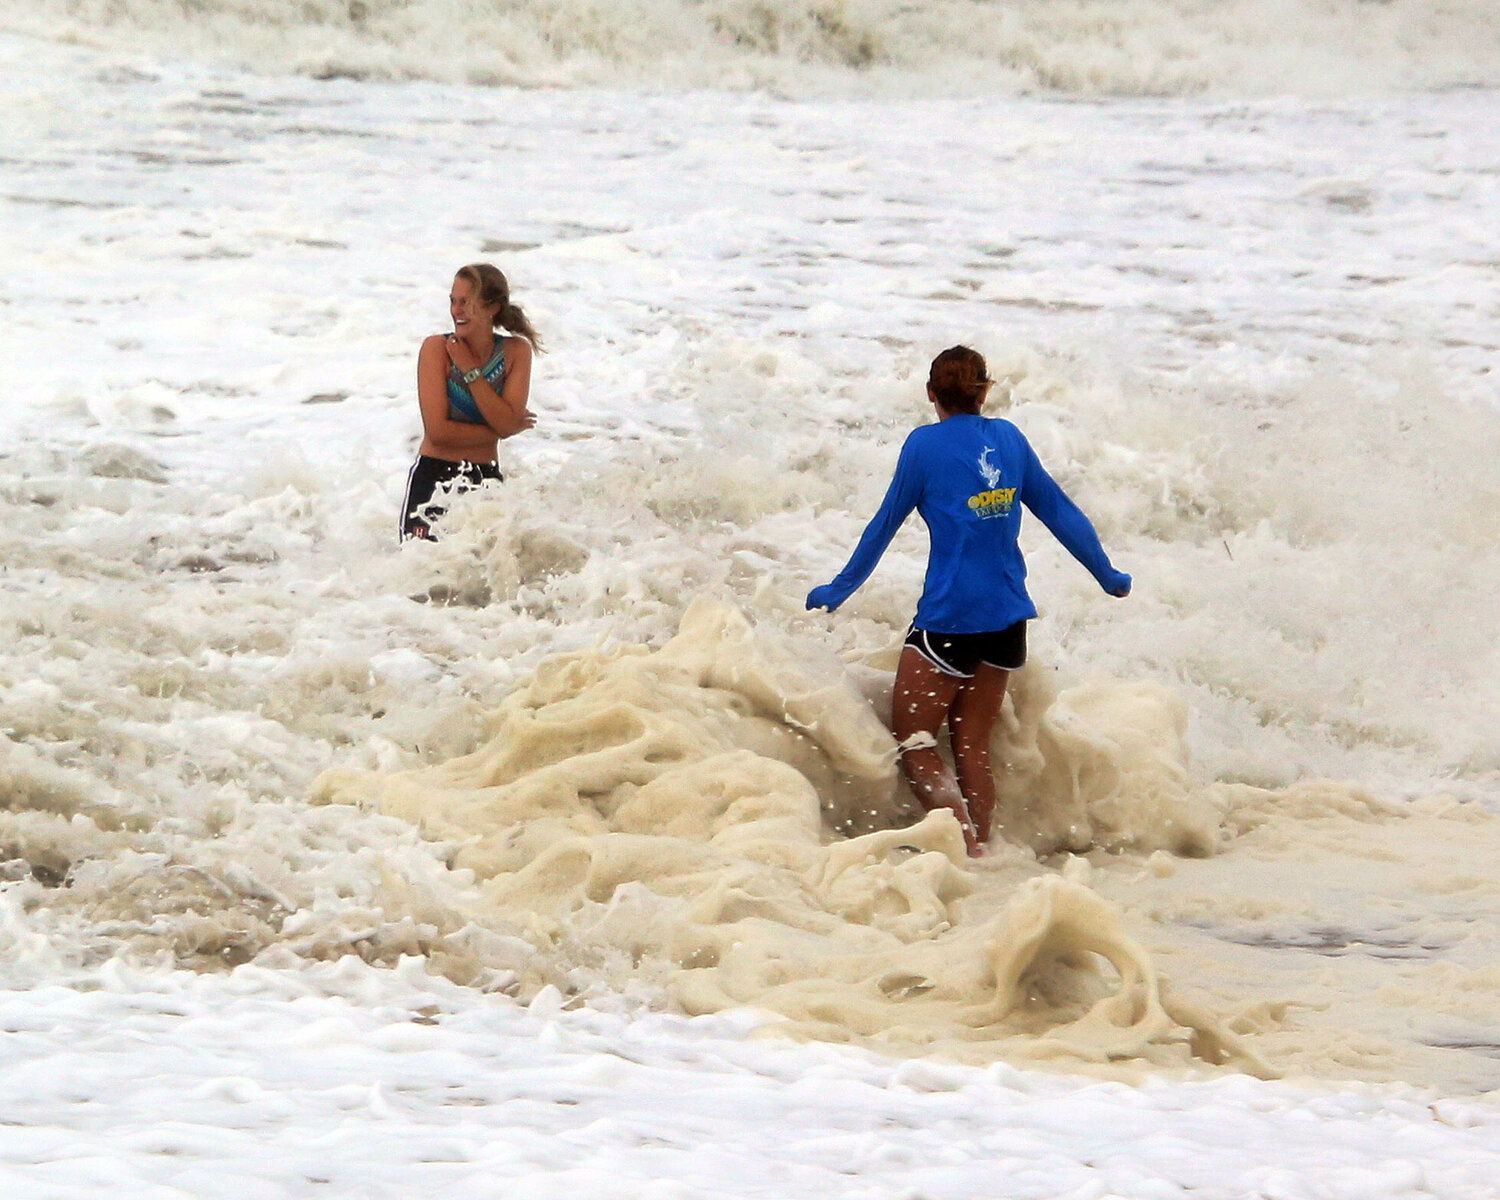 Amid the rain and high winds of Ophelia, visitors to Cape Henlopen State Park found the surf to be rough and foamy at high tide Saturday afternoon.